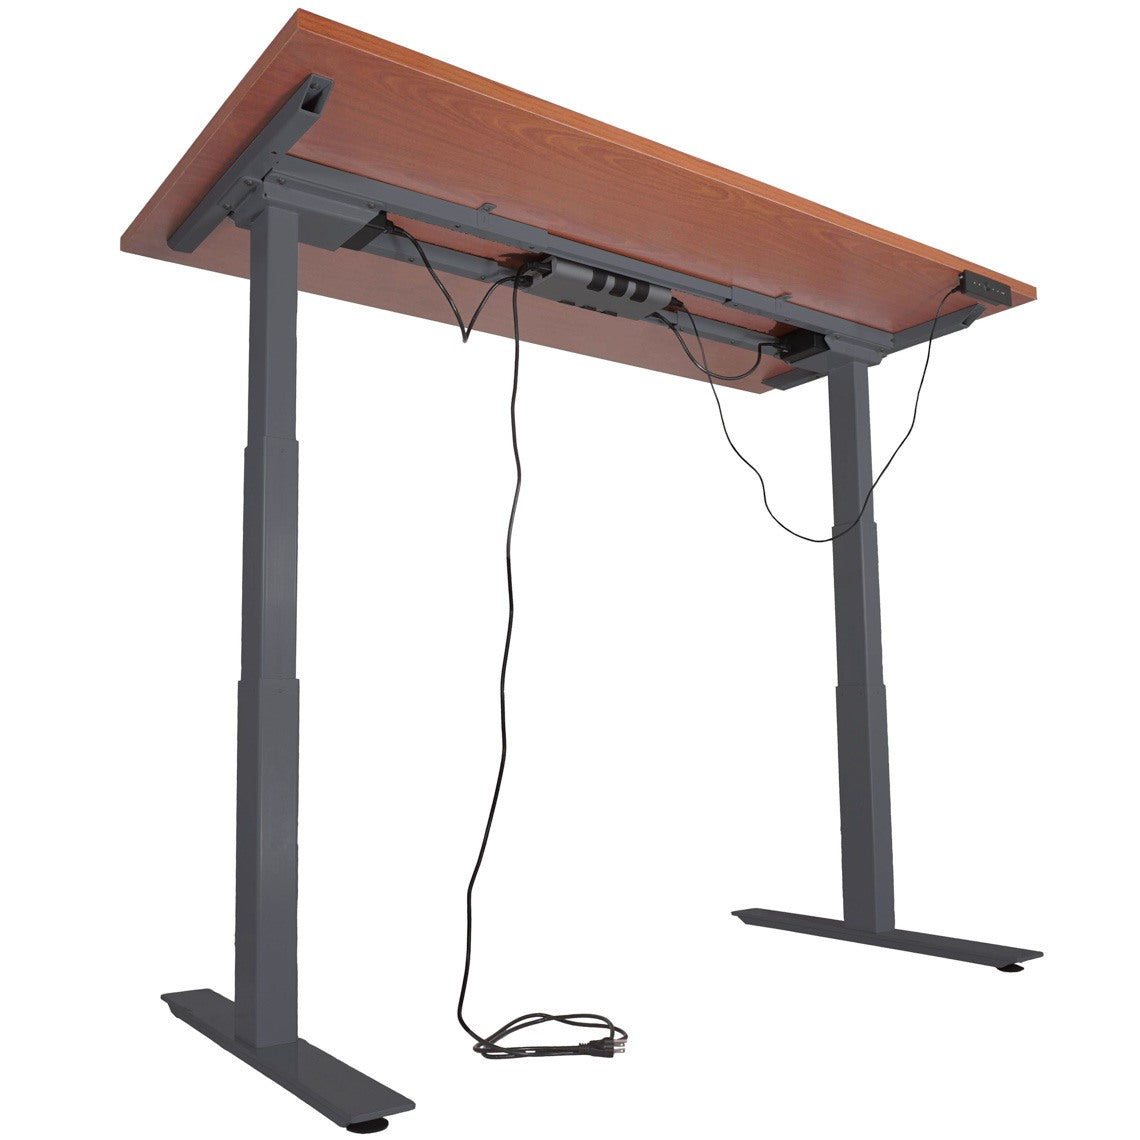 A6 Adjustable Sit To Stand Desk 24"- 50" W/ Wood 60" X 30" Top - view 5